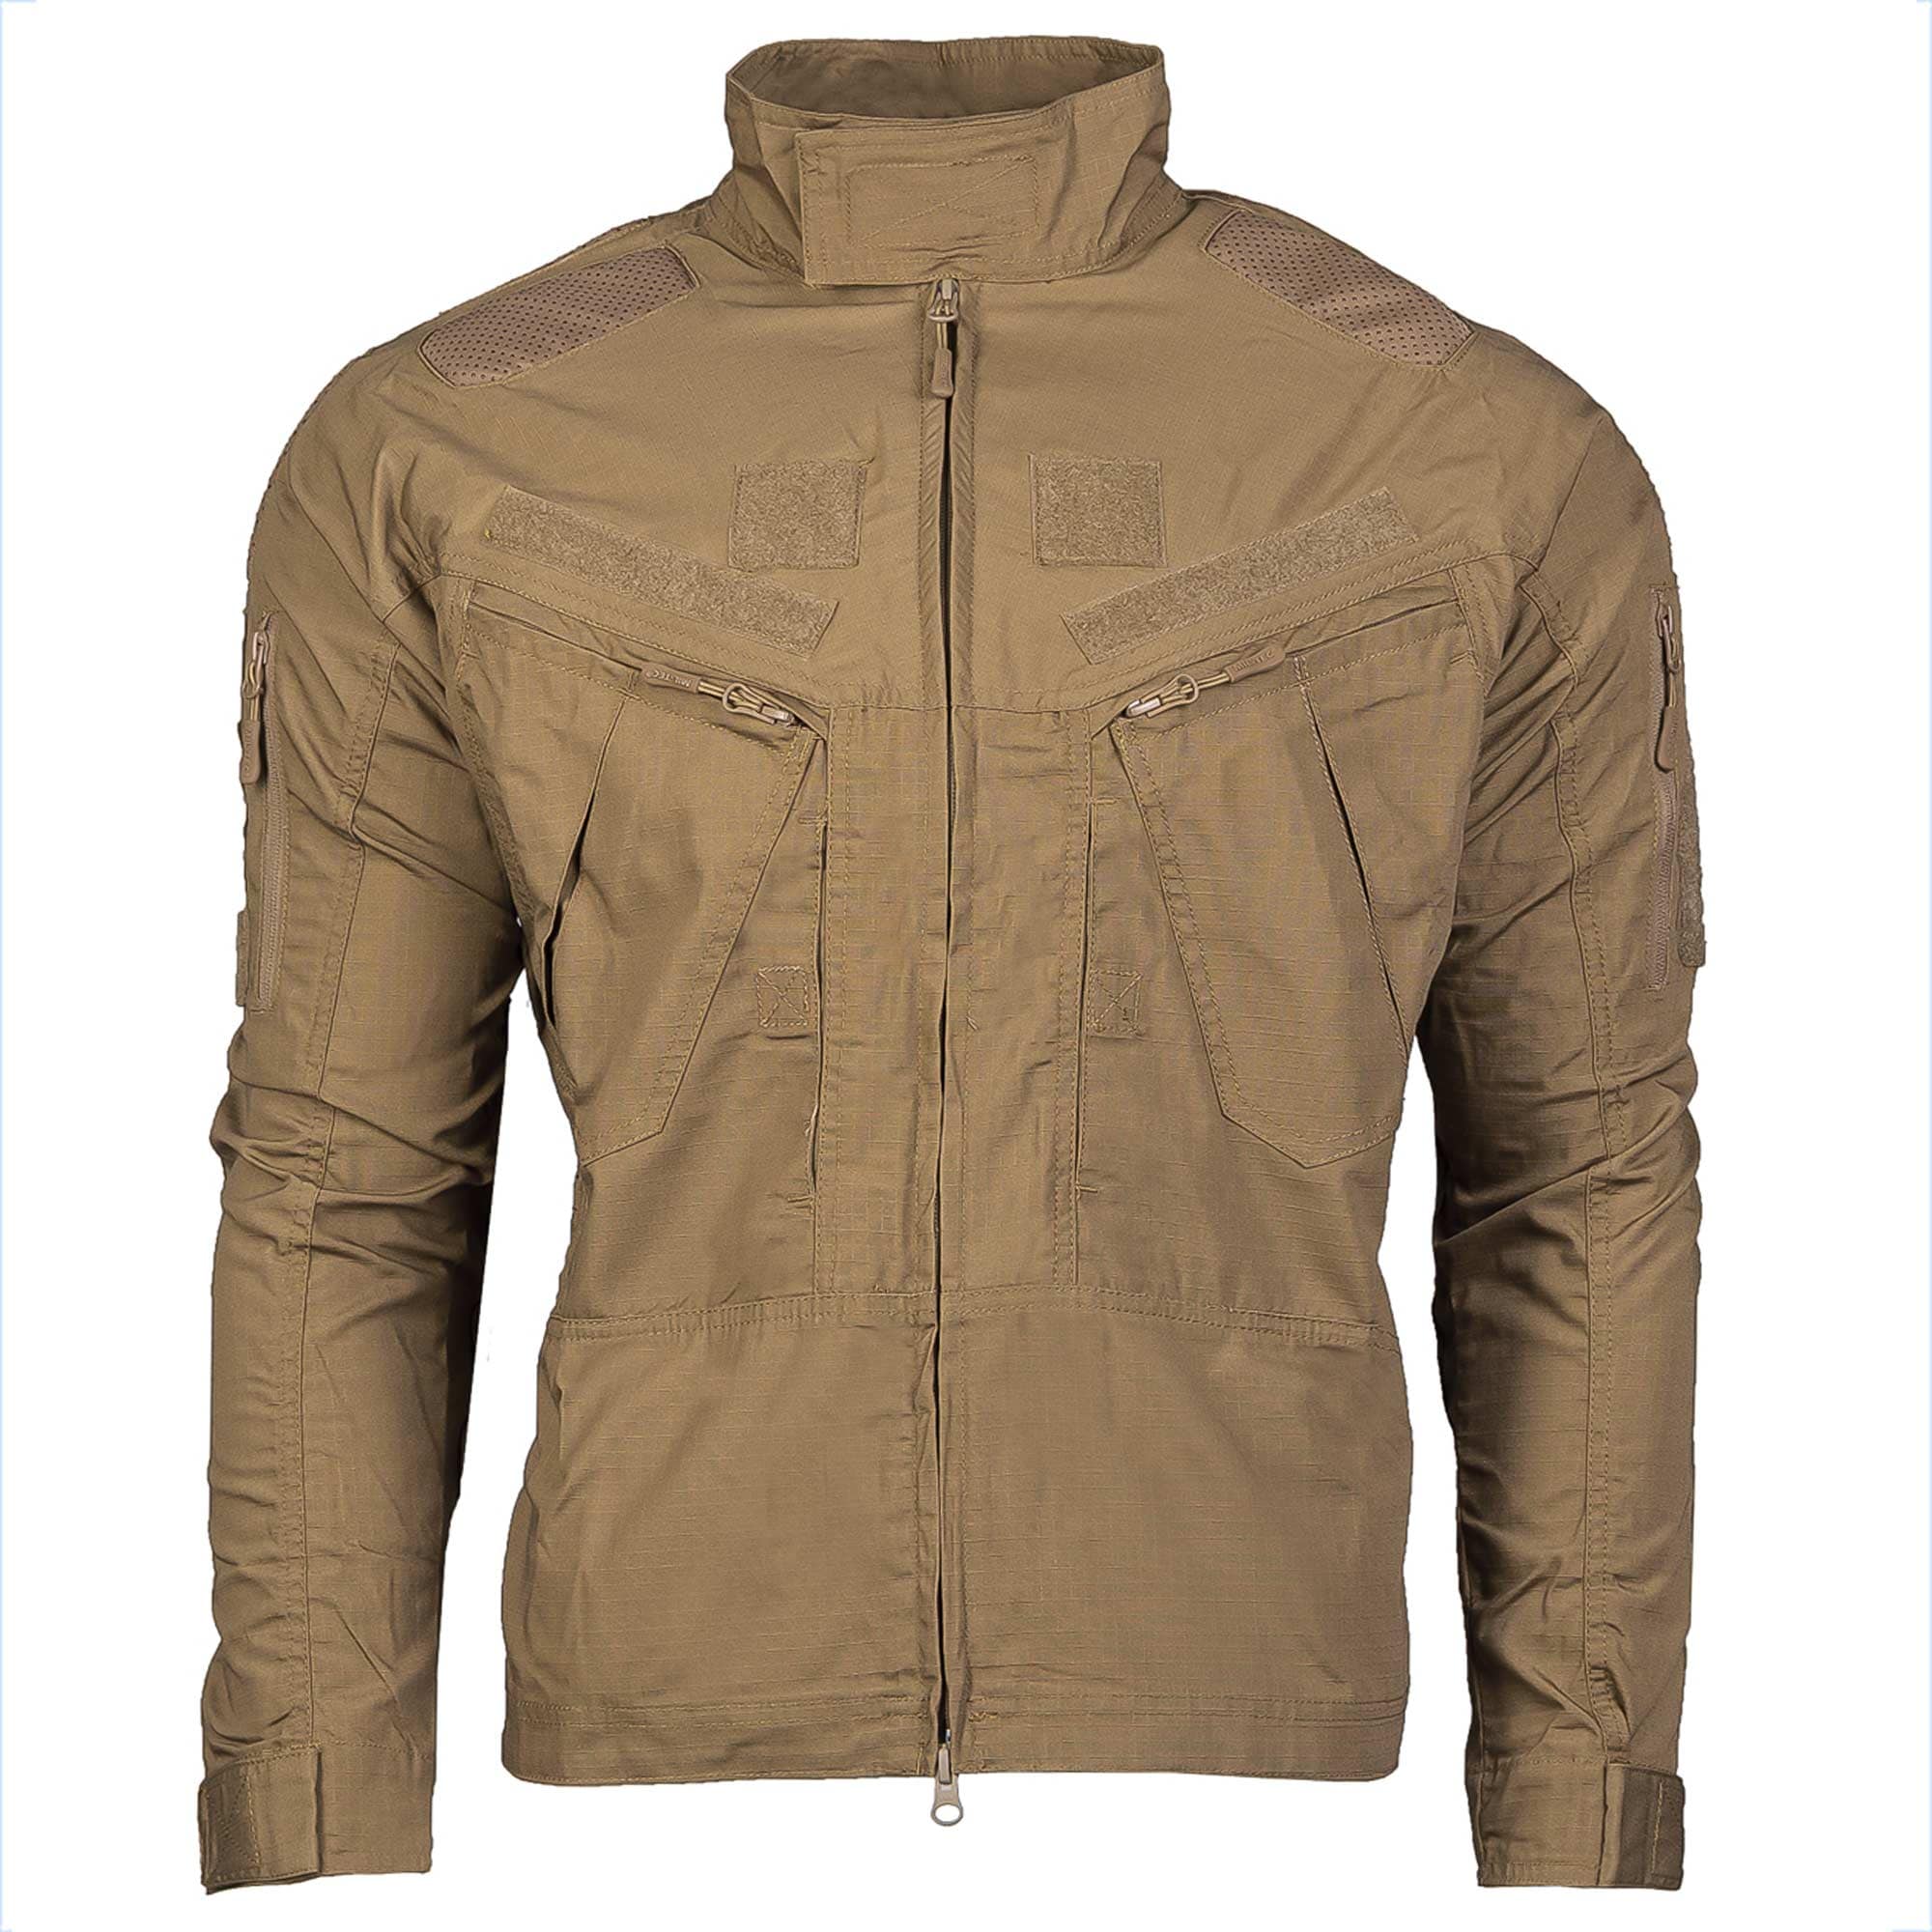 Purchase the Mil-Tec Combat Jacket Chimera dark coyote by ASMC